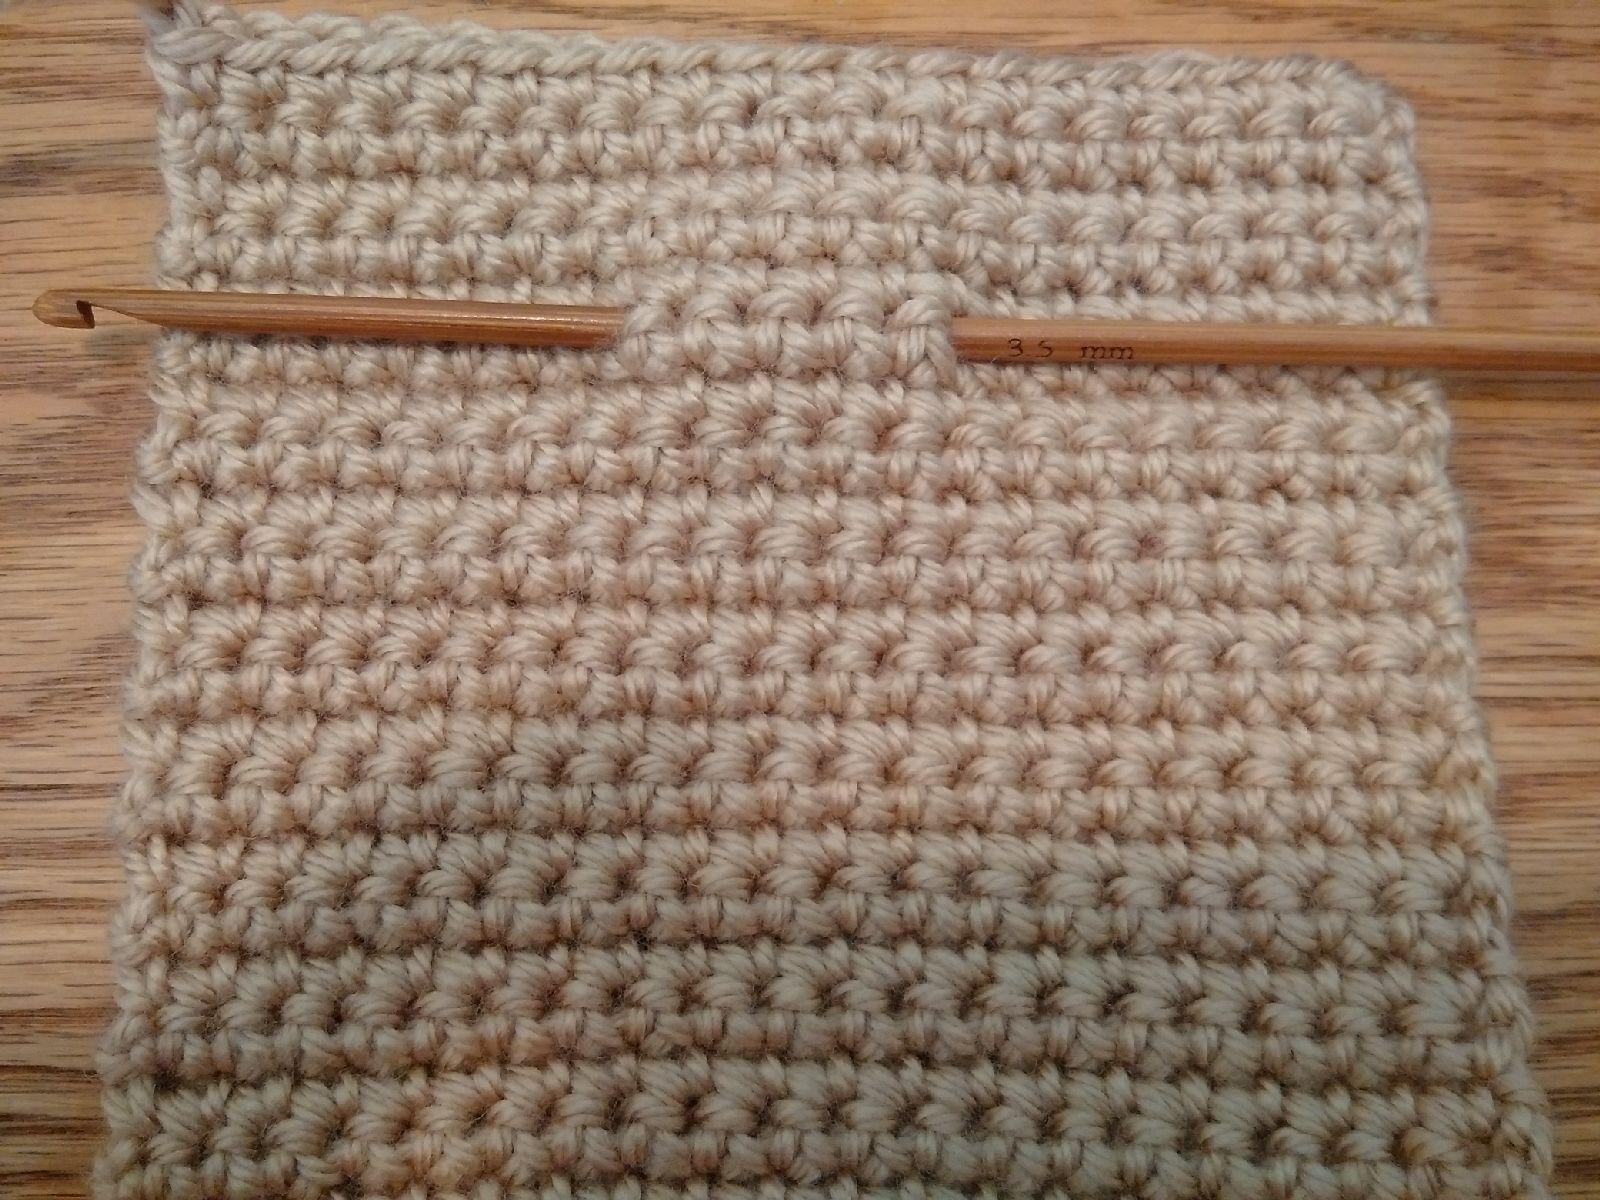 swatch crocheted with 3.5mm hook